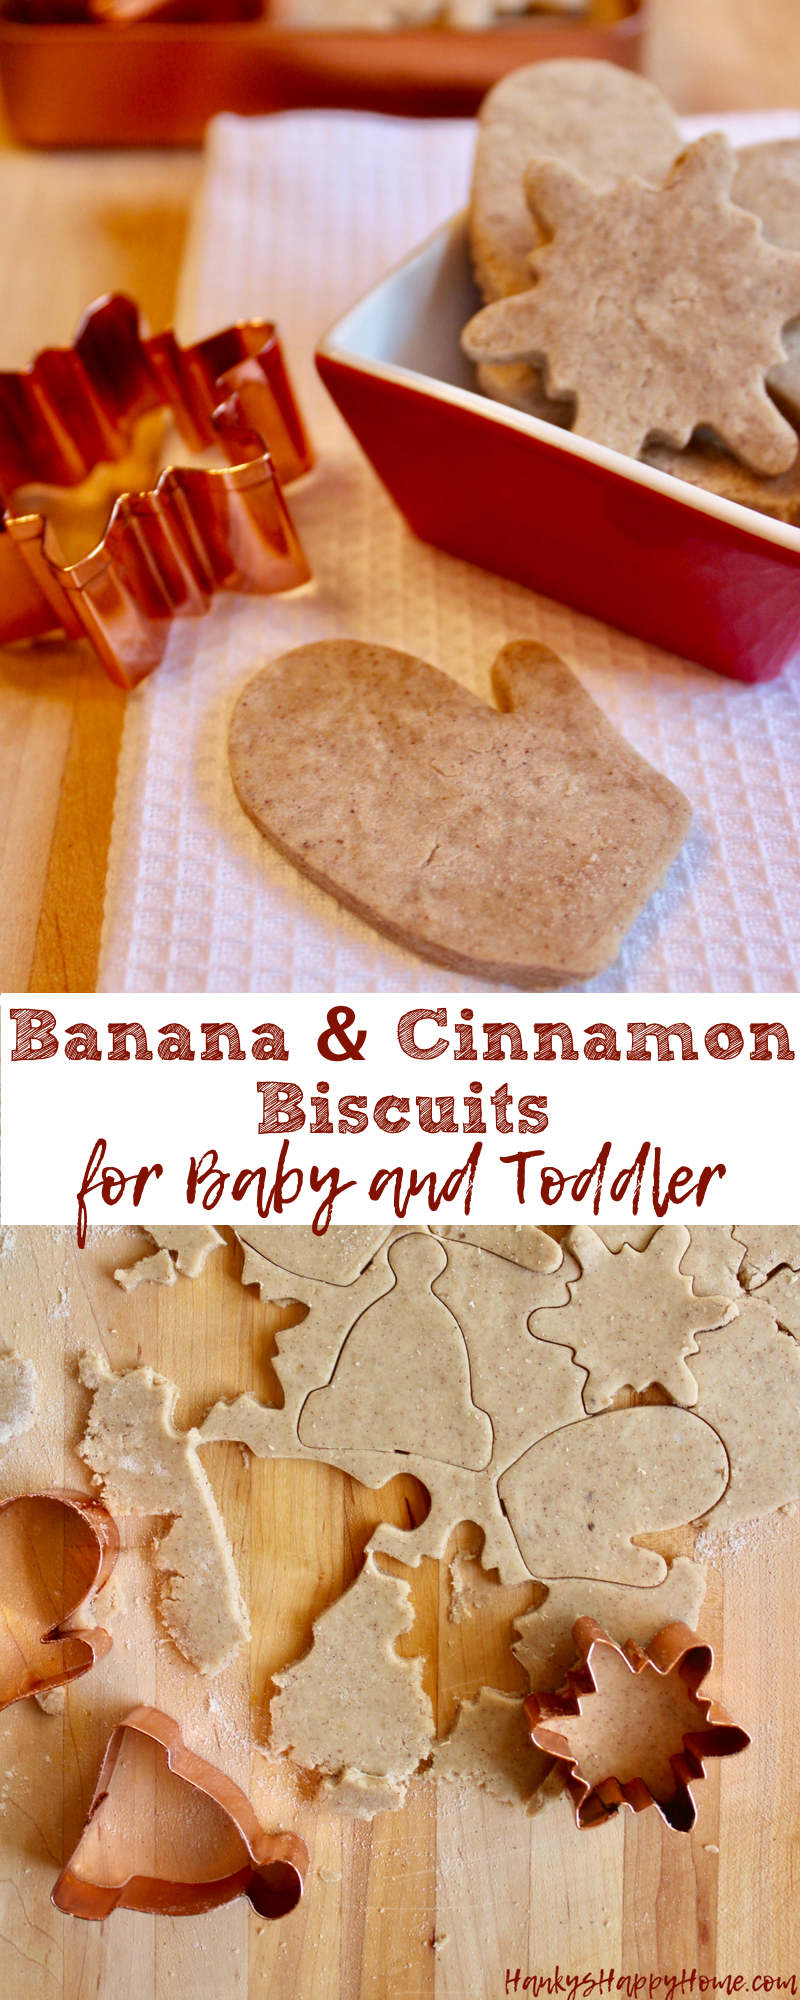 These Banana & Cinnamon Biscuits are great for teething or just a sweet treat for baby!